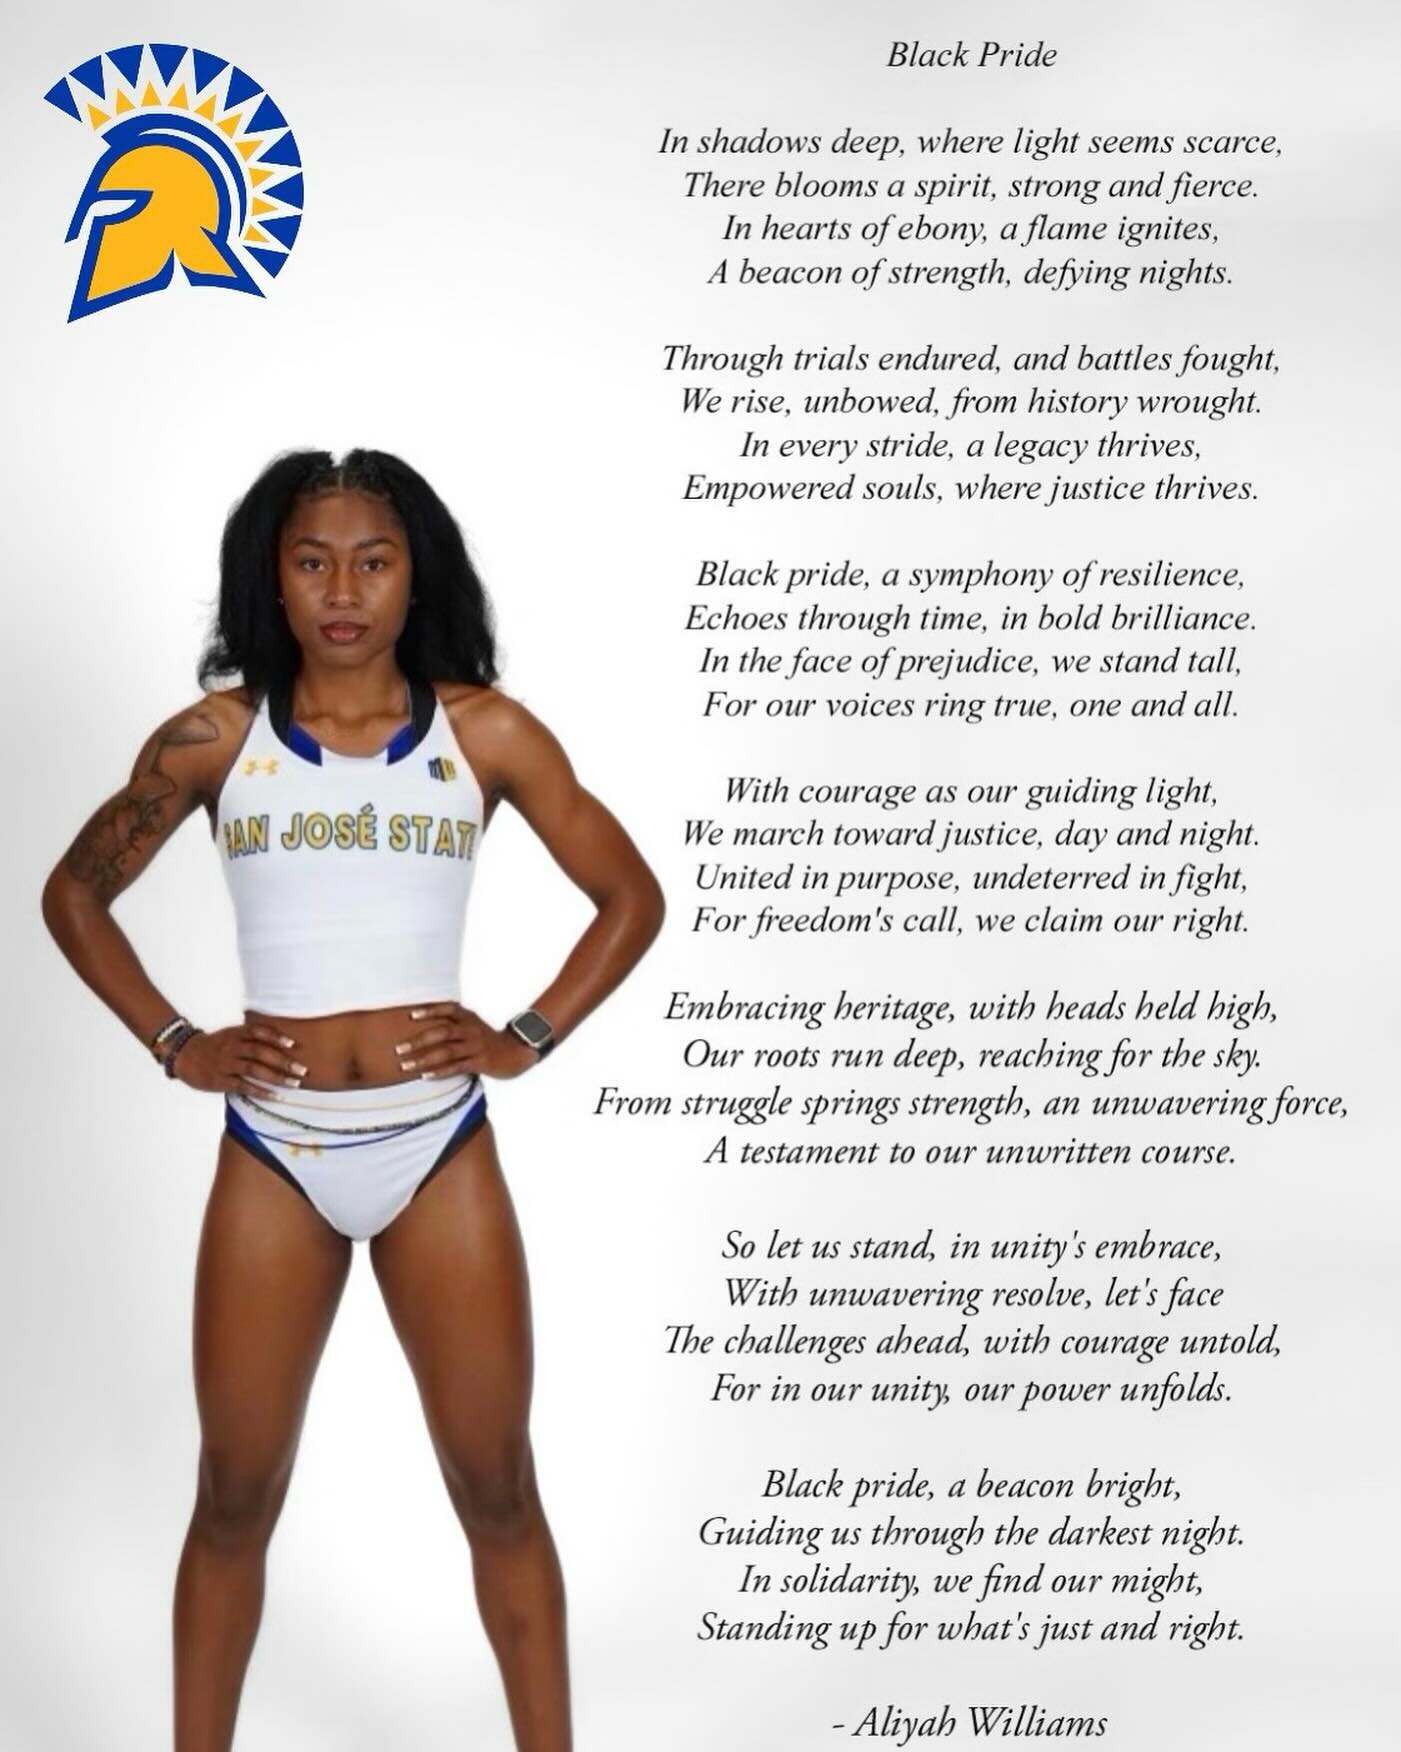 Celebrating 2024 Black History Month! 

Highlighting one of our SAAC reps Aliyah Williams and her poem on Black History Month! ✨

#AllSpartans | #sjsusaac | #blackhistorymonth